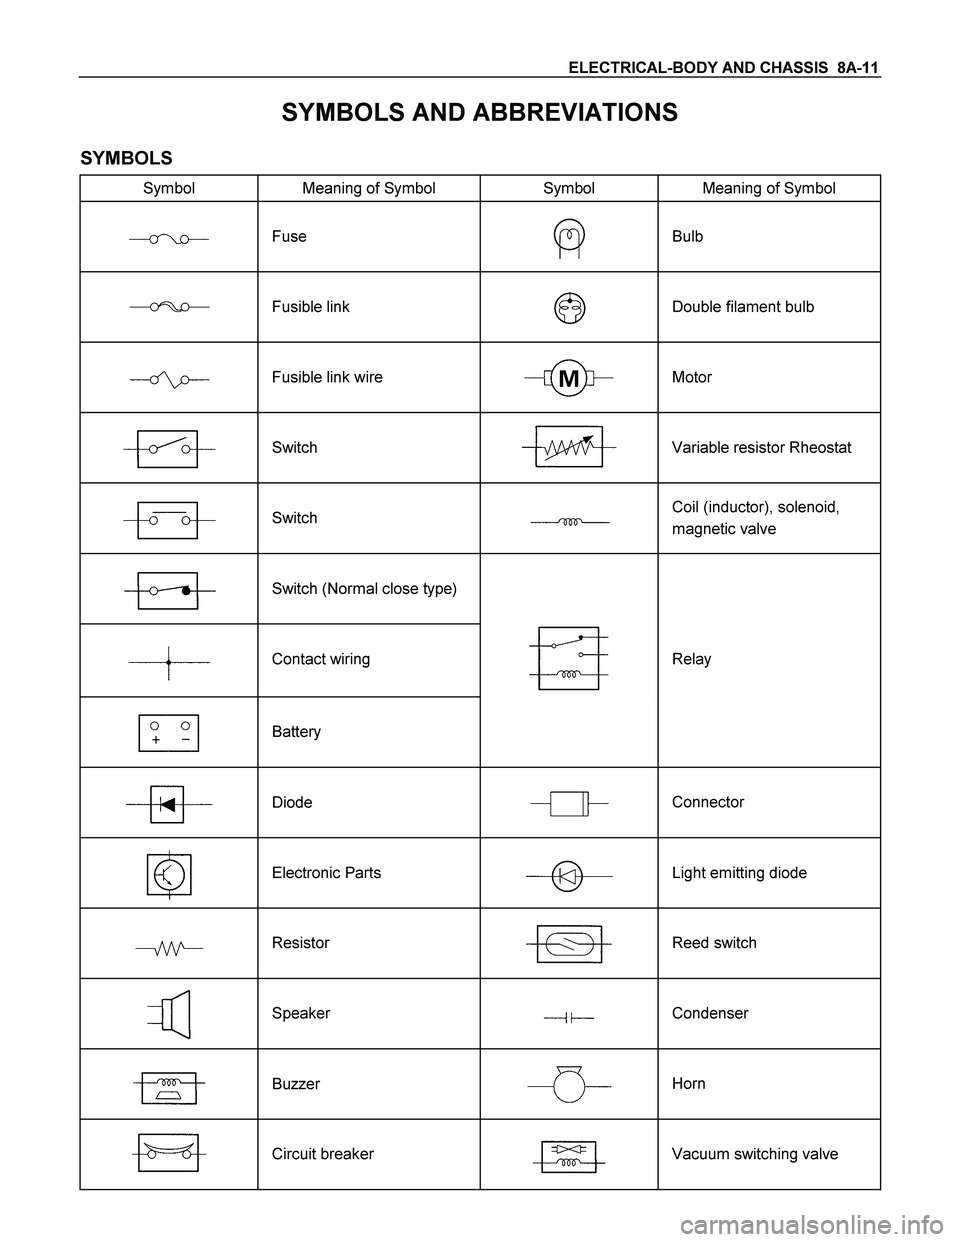 ISUZU TF SERIES 2004 Owners Manual ELECTRICAL-BODY AND CHASSIS  8A-11 
SYMBOLS AND ABBREVIATIONS 
SYMBOLS 
Symbol  Meaning of Symbol  Symbol  Meaning of Symbol 
 
  
Fuse   
Bulb 
 
 
  
Fusible link   
Double filament bulb 
 
 
  
Fus